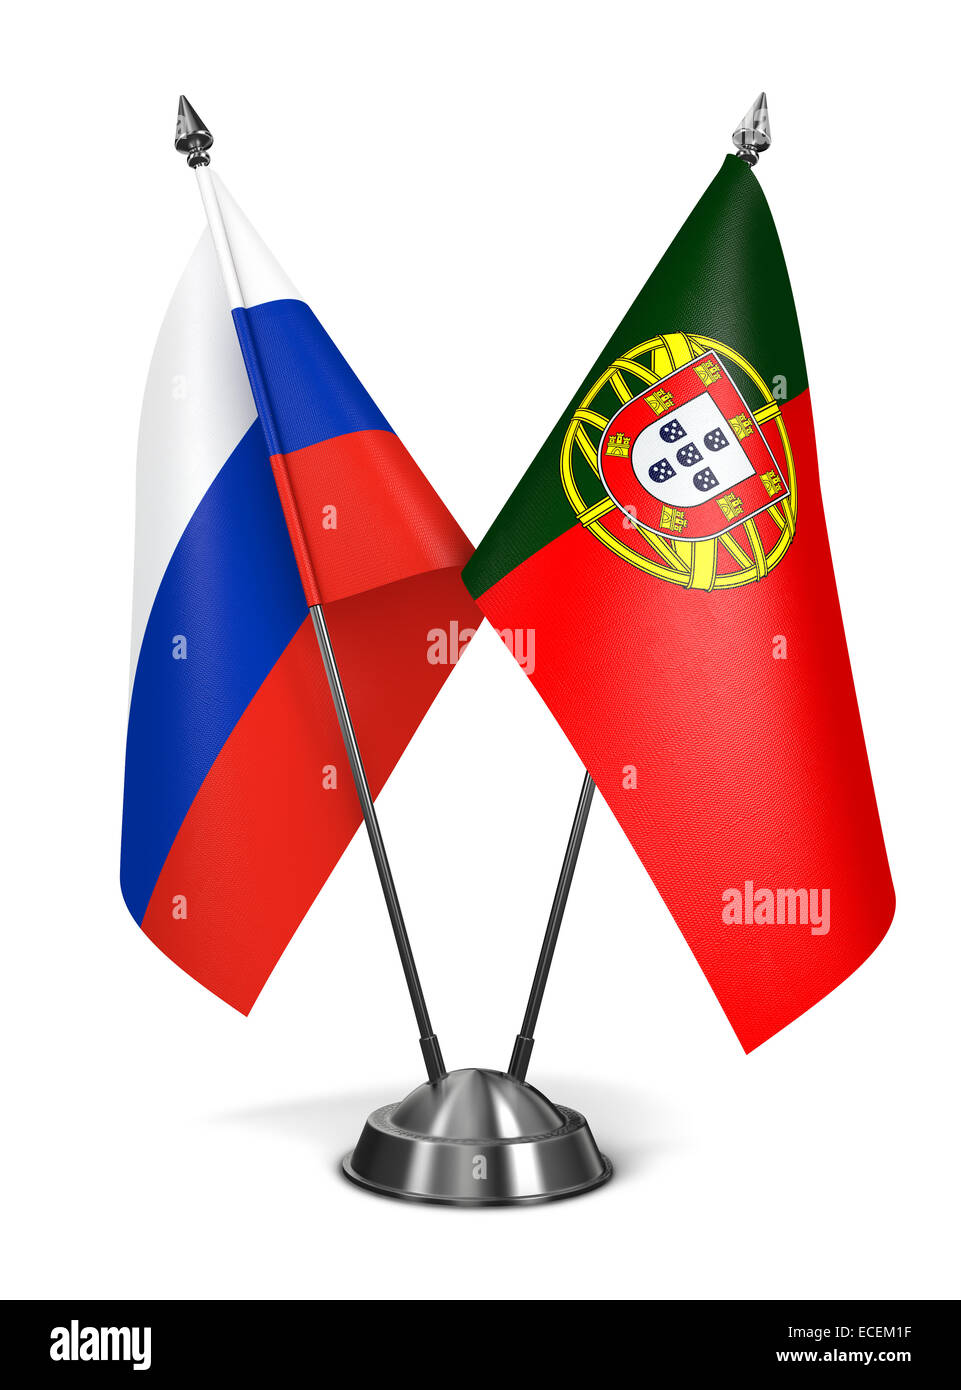 Russia and Portugal - Miniature Flags. Stock Photo